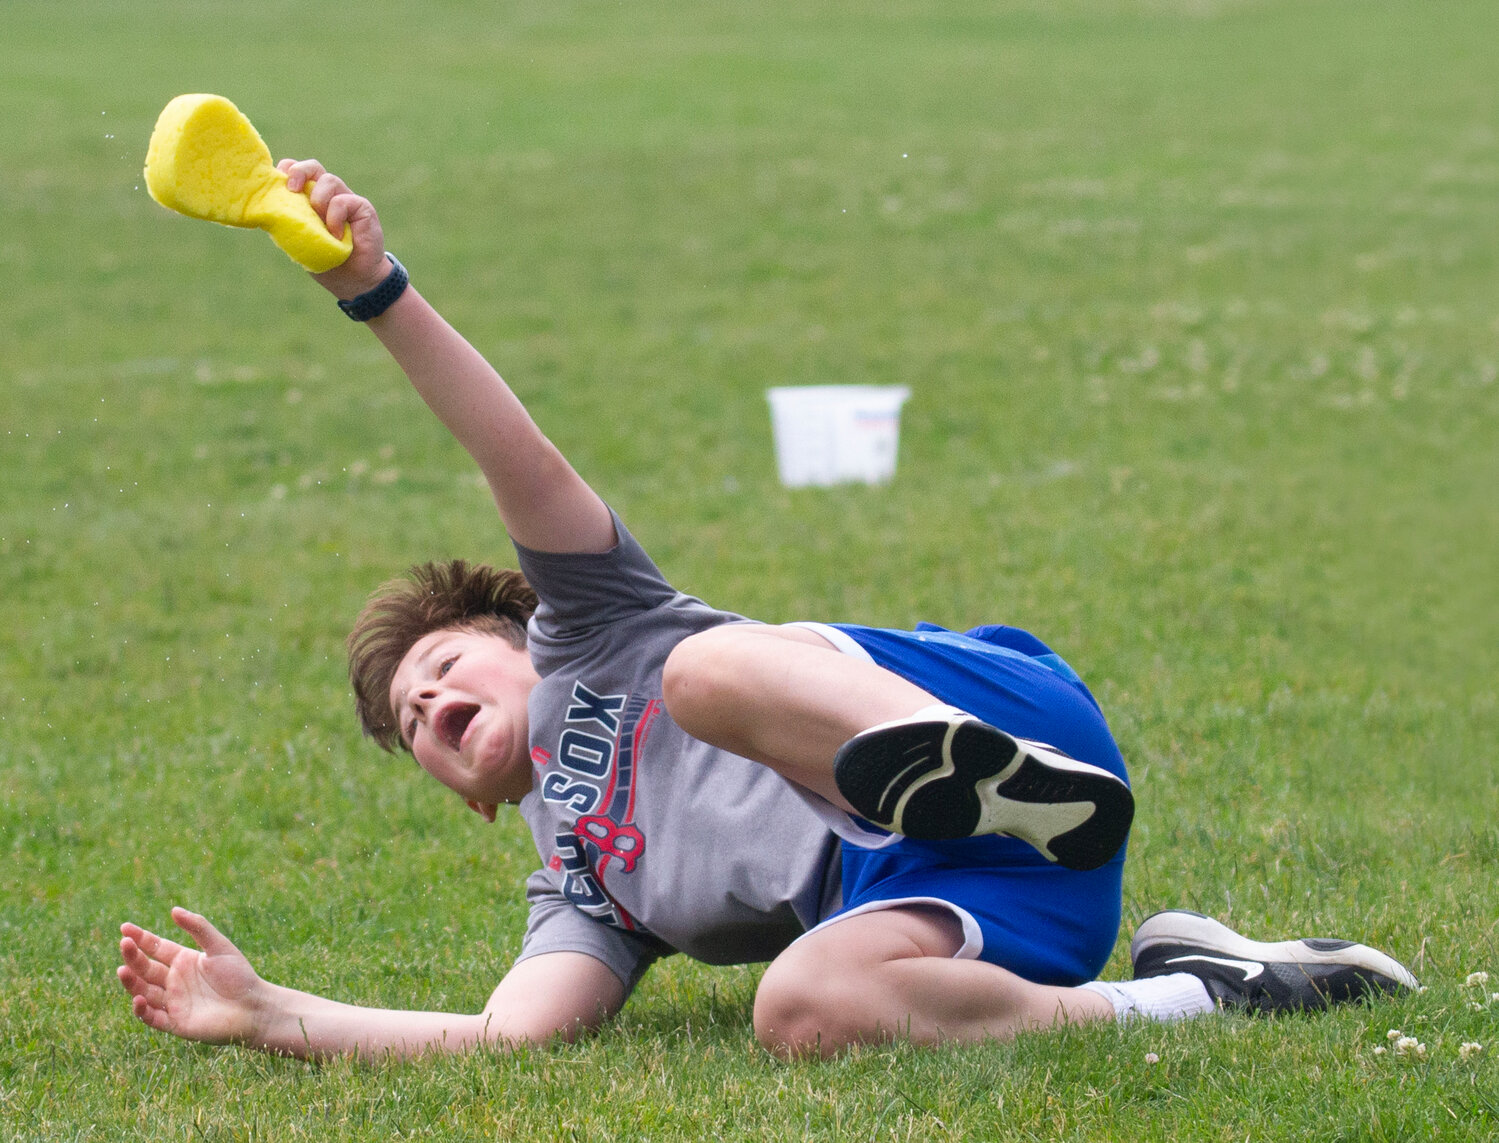 Cooper Thimme competes in the sponge race during Field Day at the middle school last week.